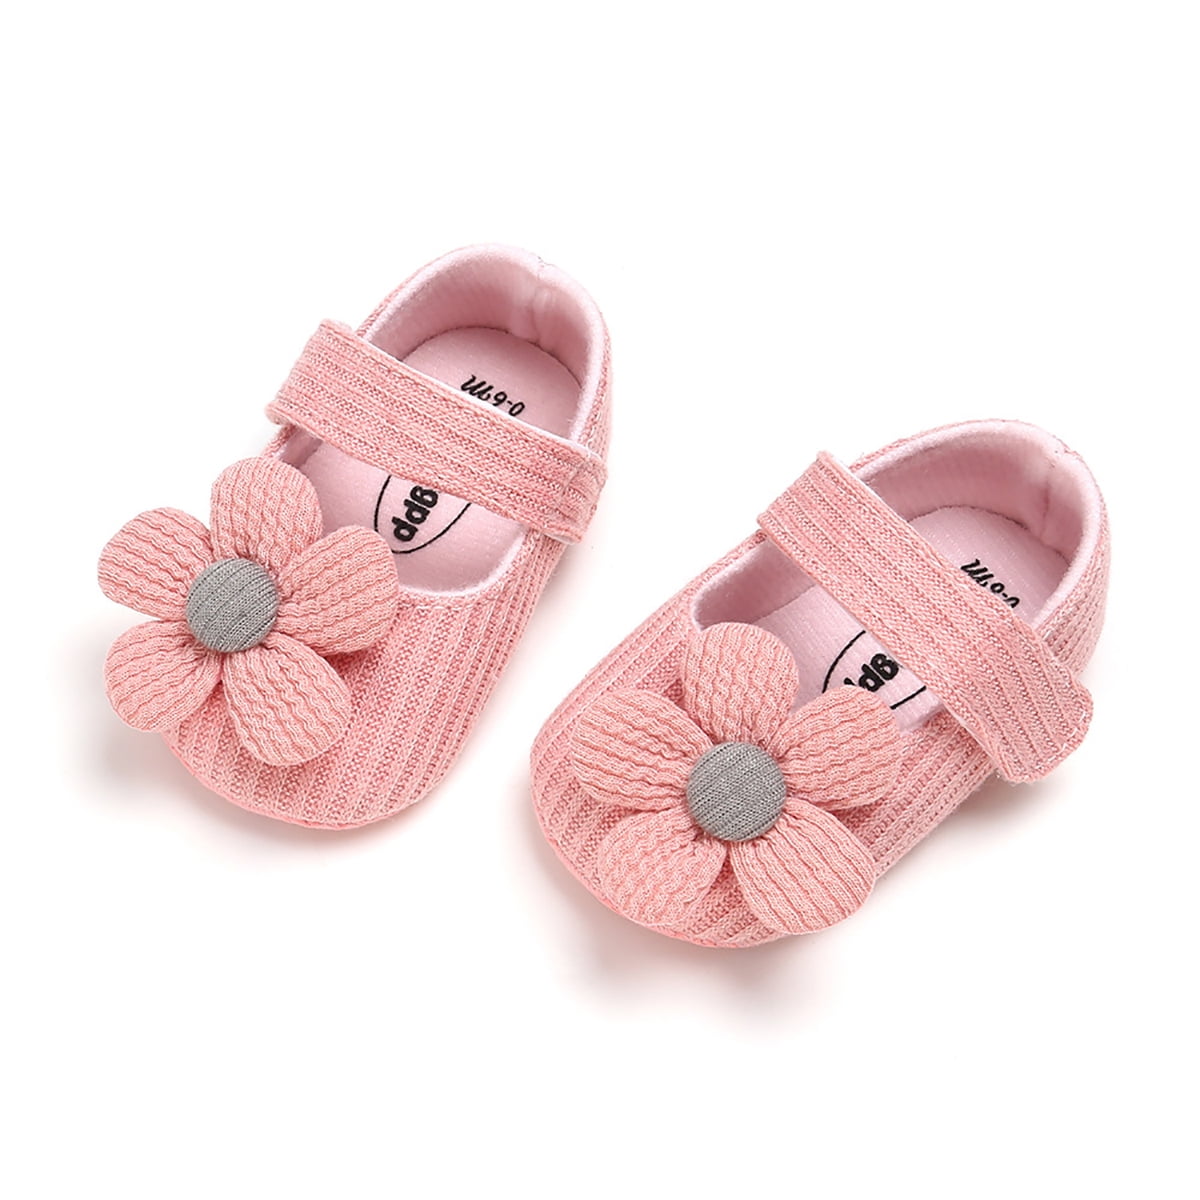 Toddler Girl Flower Sandal Shoes Soft Sole Anti-slip Baby Sneakers Crib Shoes 